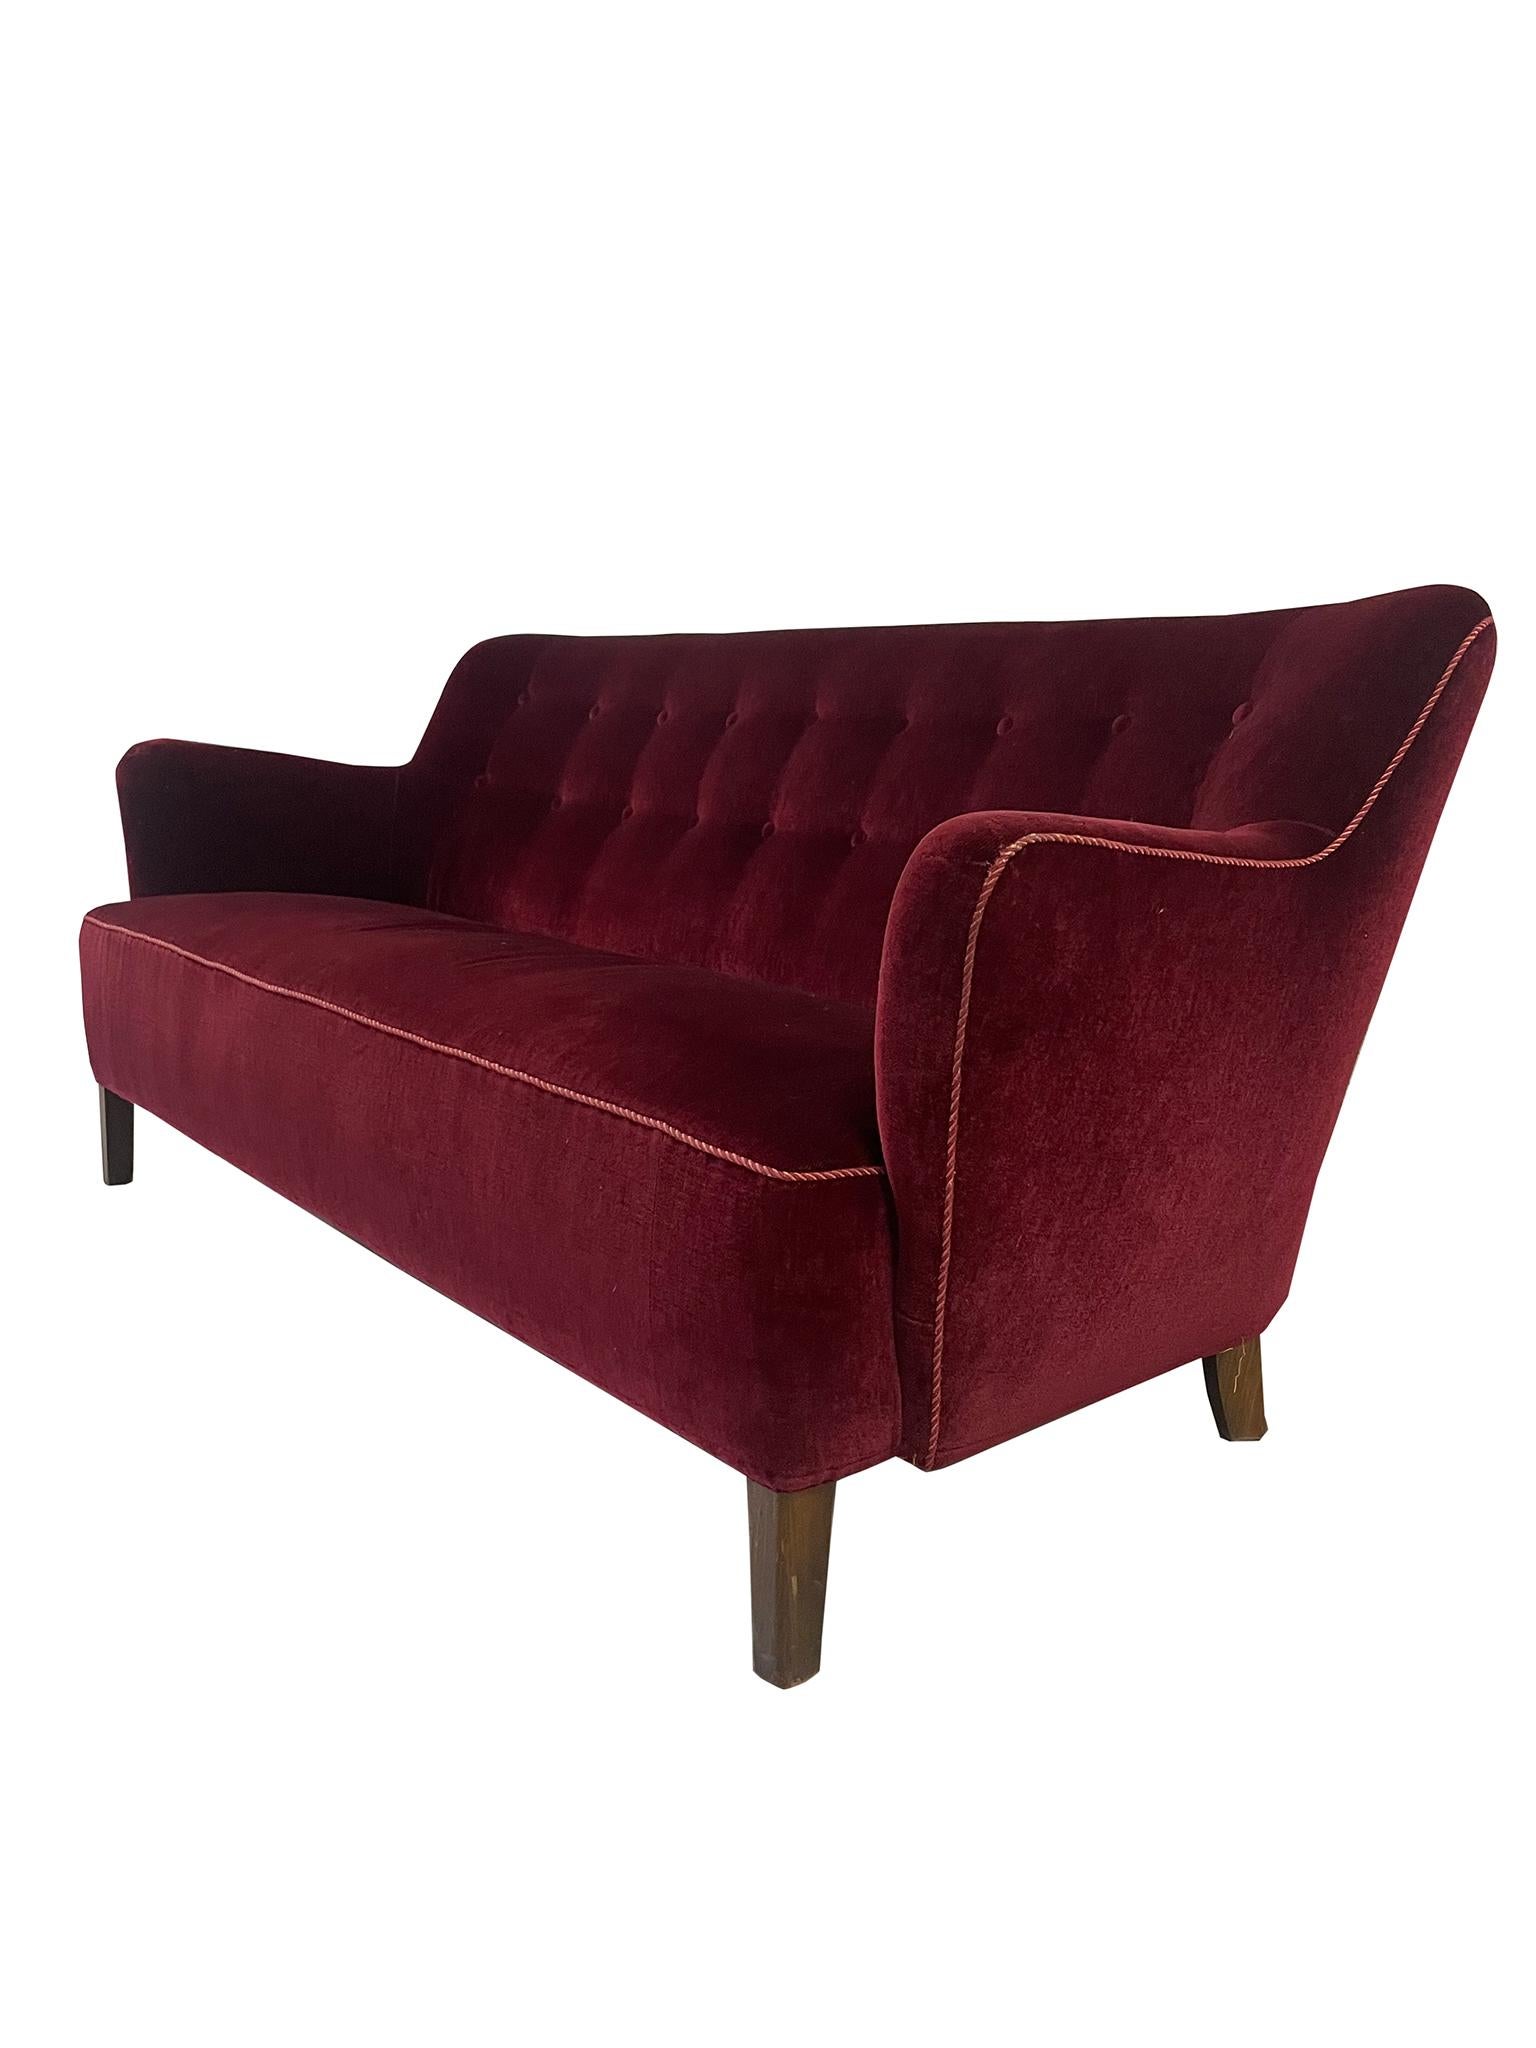 Charming Mid-Century Danish Modern Wingback Sofa by Iconic furniture maker Slagelse Møbelværk. Beechwood legs support a typical Danish winged backrest and curved arms. Further supported by coils and a deep, plush seat, this sofa is a wonderful